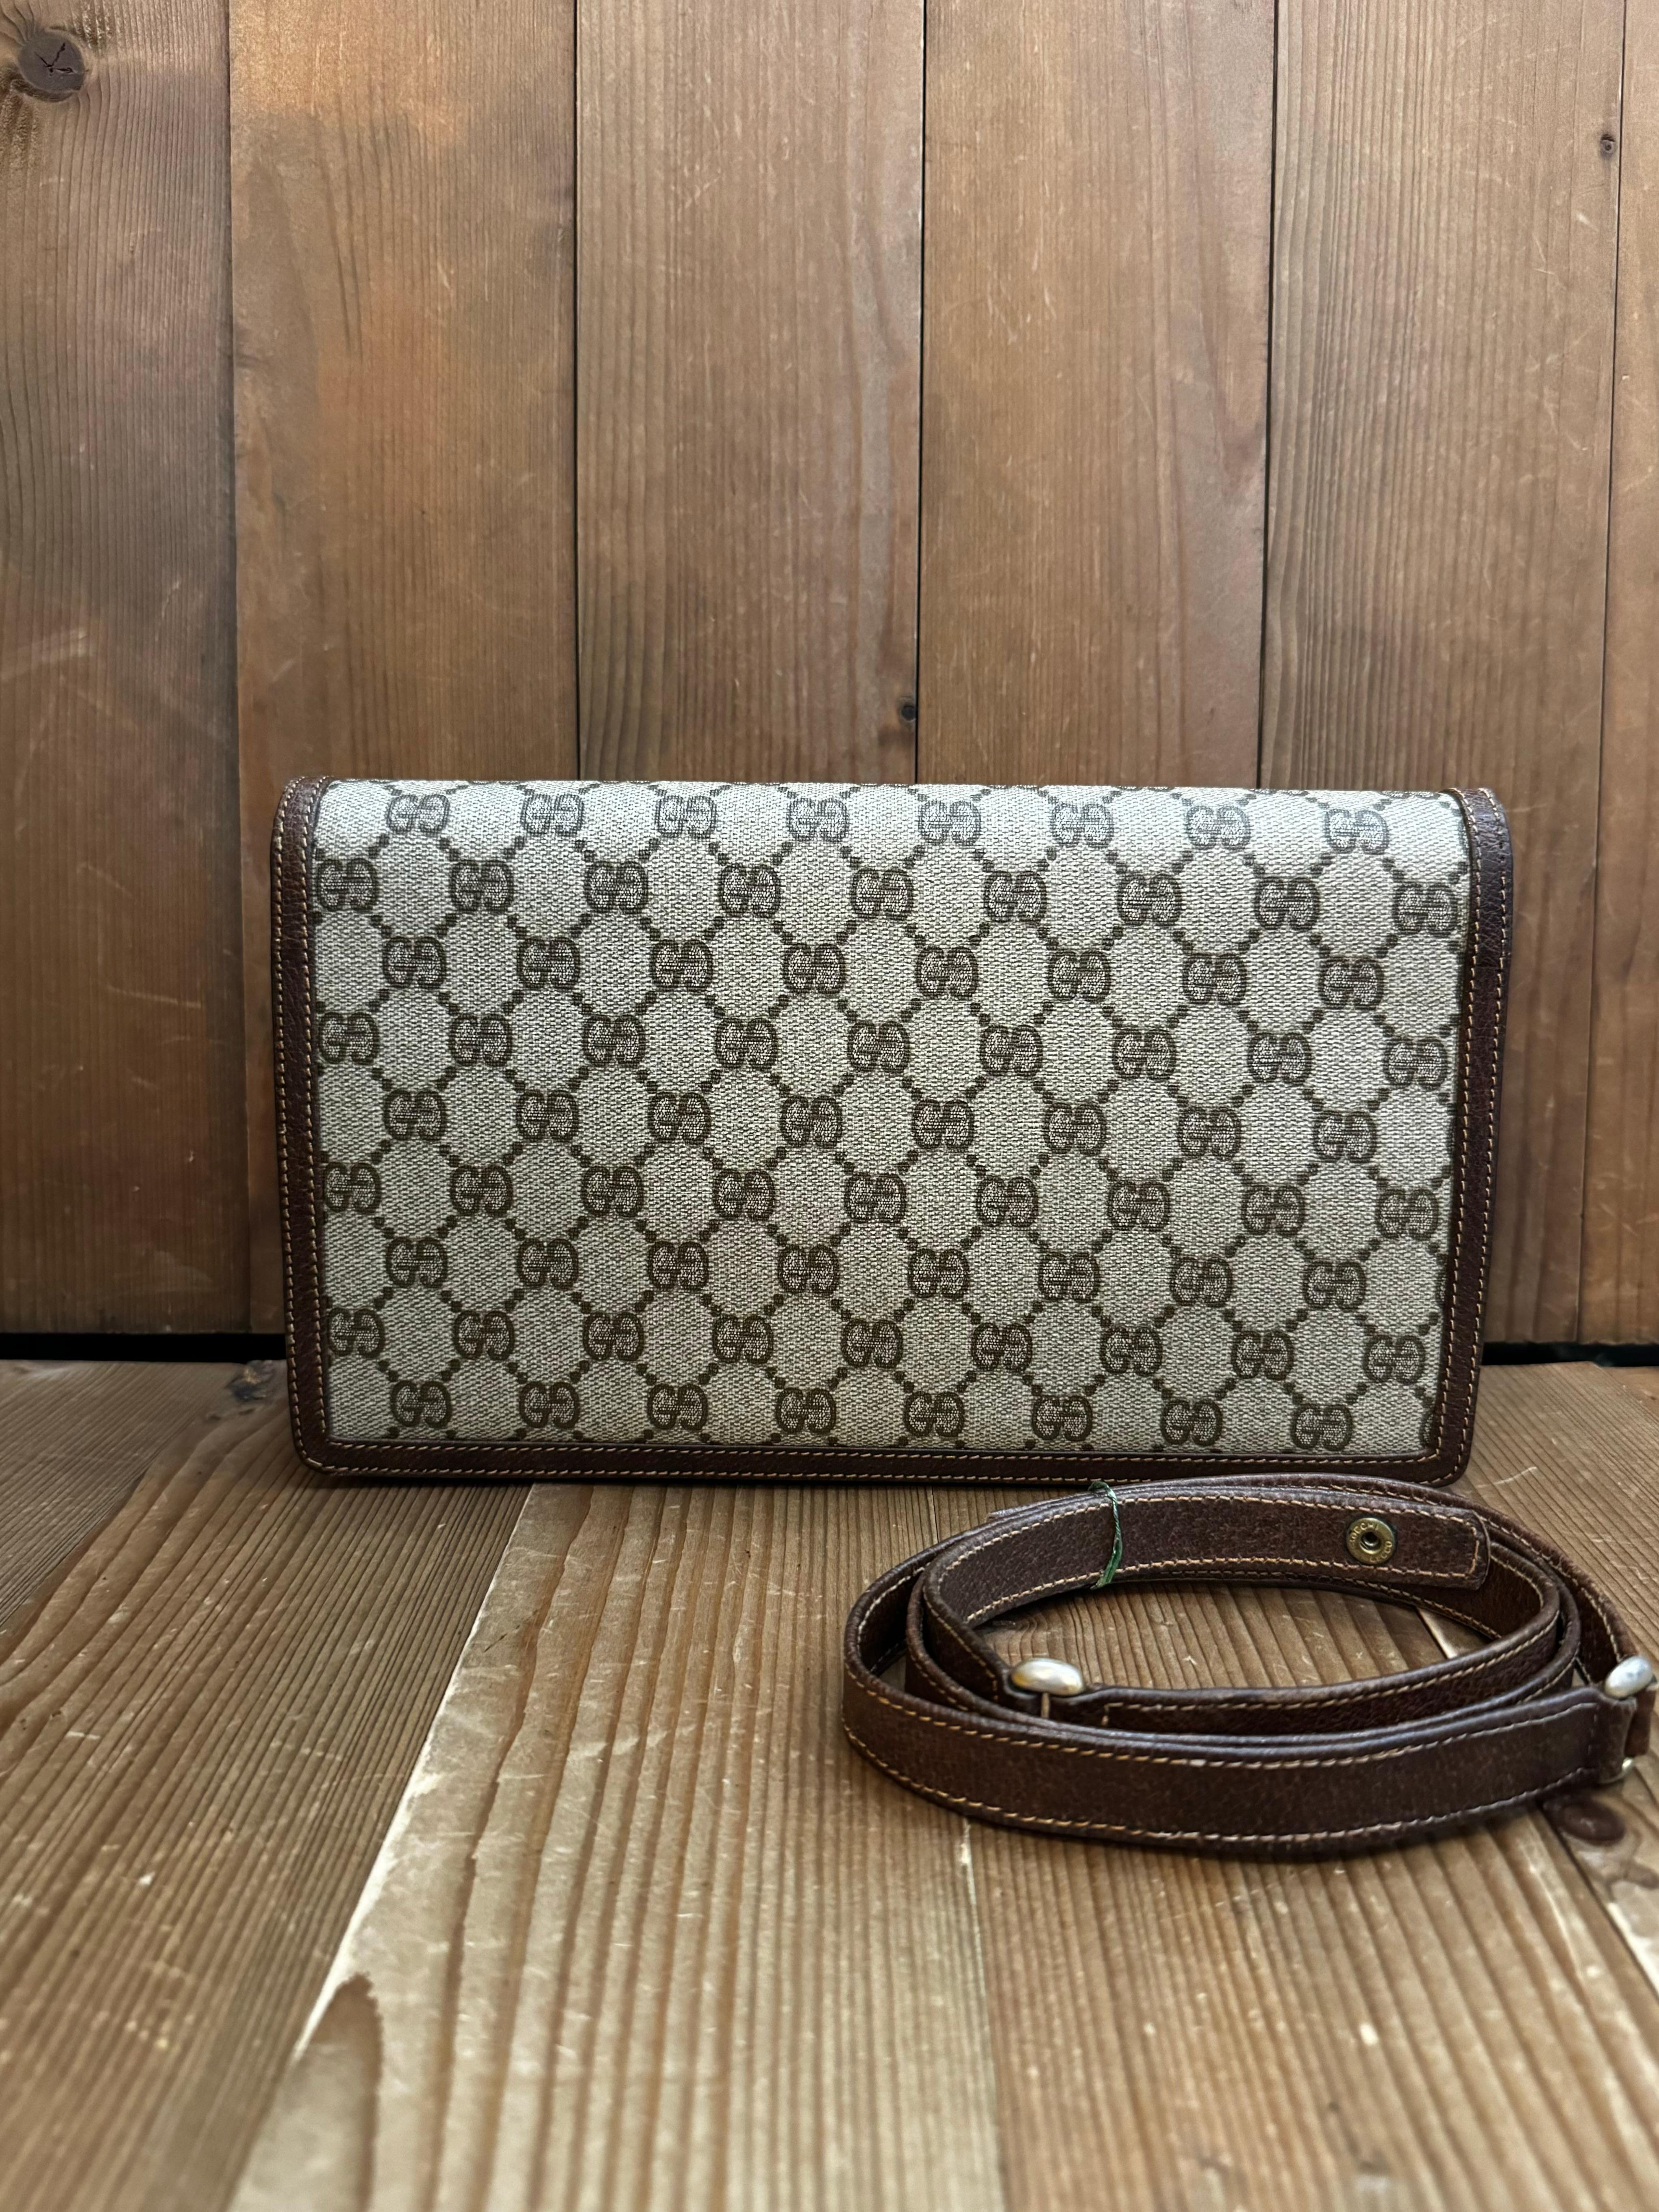 This vintage GUCCI BOUTIQUE two-way shoulder/clutch bag is crafted of GG monogram coated canvas and pigskin leather in brown featuring a gold toned horsebit detail. Front flap snap closure opens to a leather interior with a zippered pocket. This